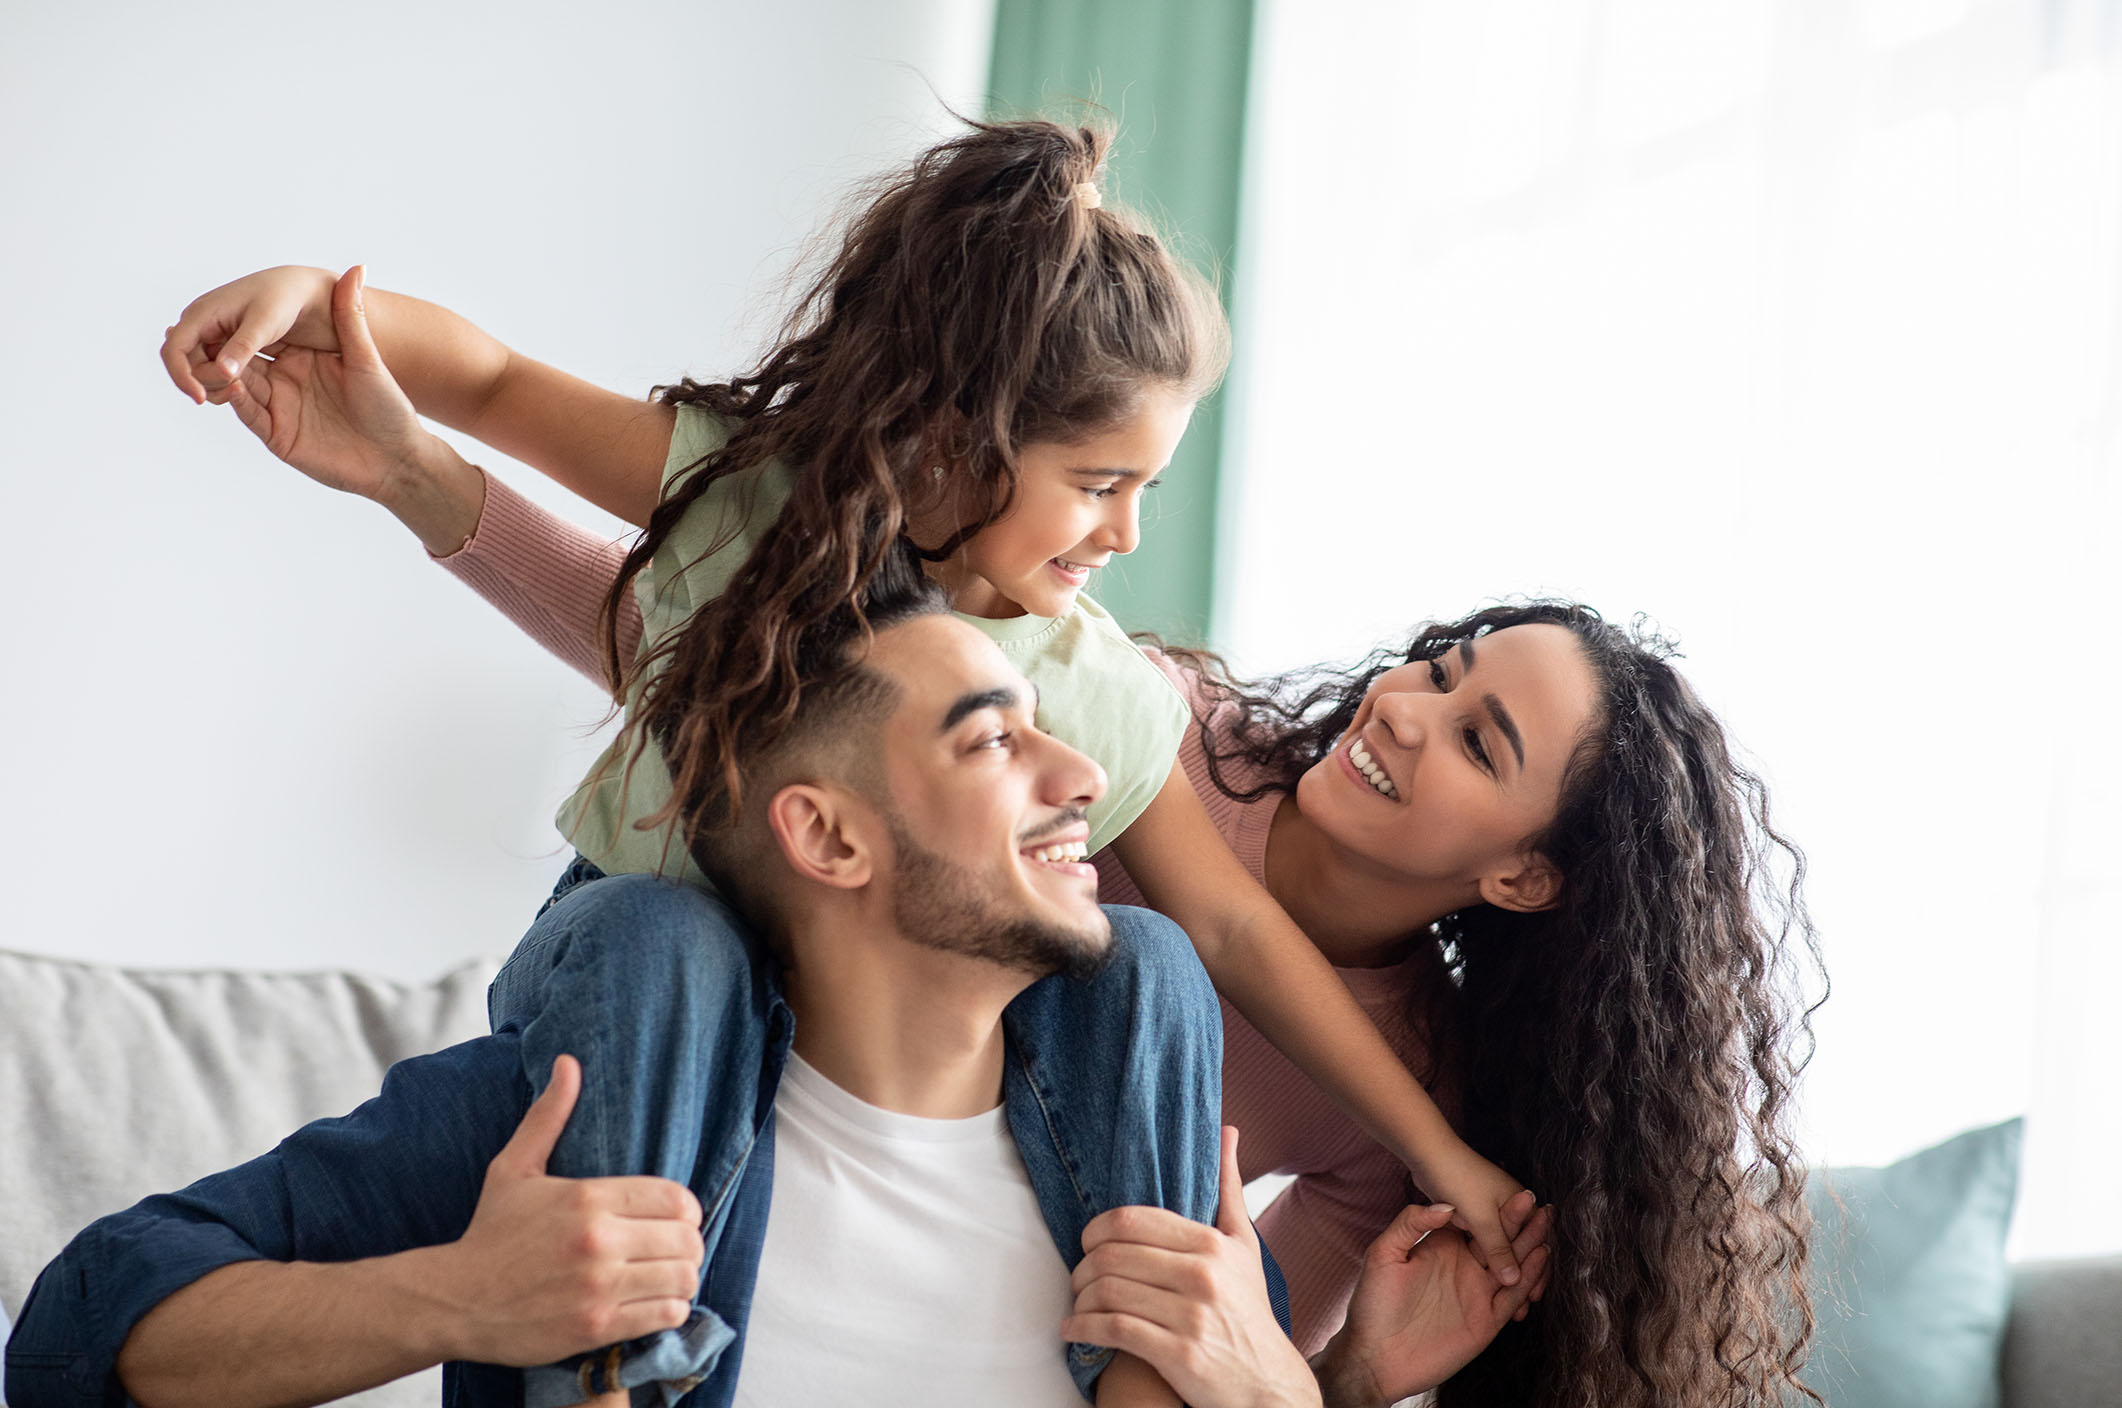 Portraif Of Cheerful Middle Eastern Family Of Three Having Fun Together At Home. Young Arabic Parents Playing With Their Little Daughter In Living Room, Mom, Dad And Child Smiling And Laughing